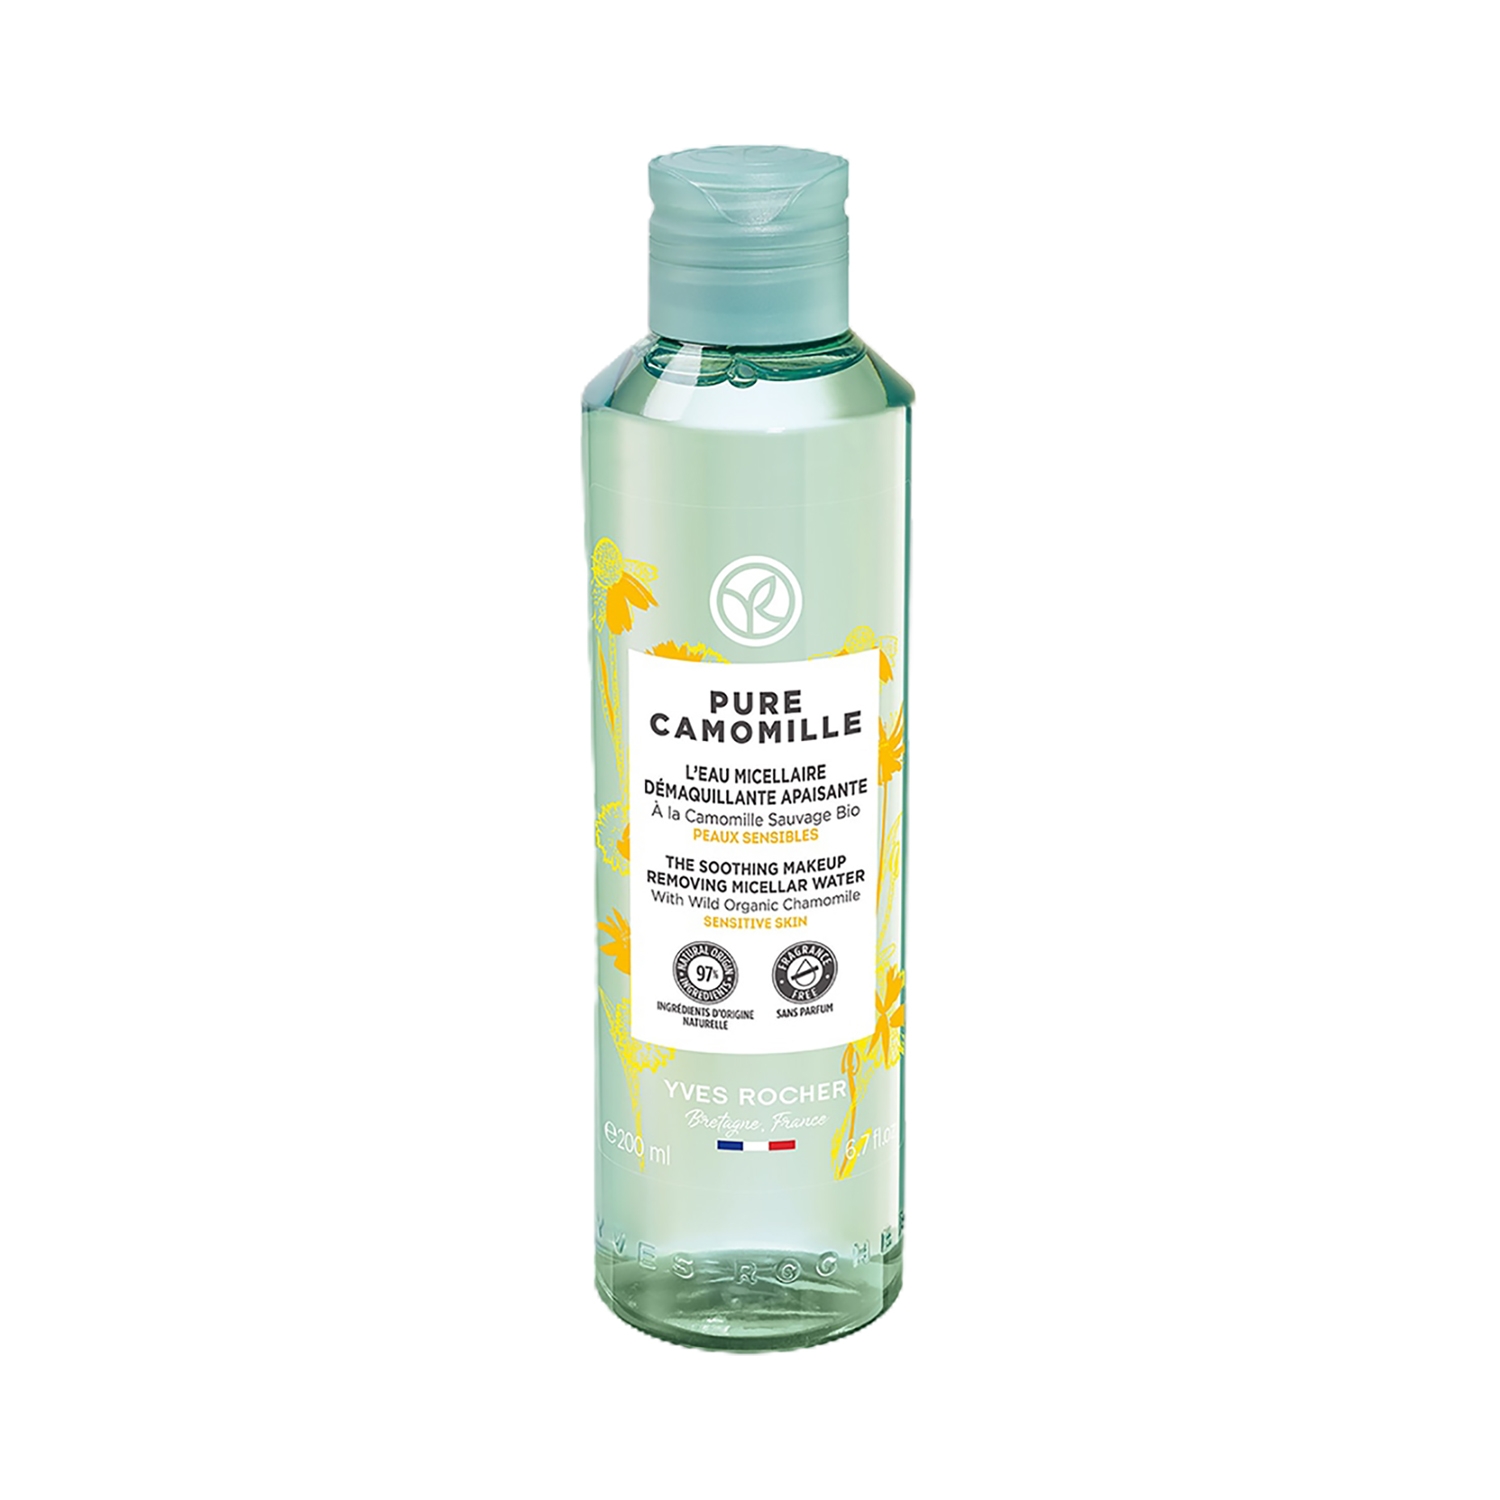 Yves Rocher | Yves Rocher Pure Camomille The Soothing Makeup Removing Micellar Water (200ml)